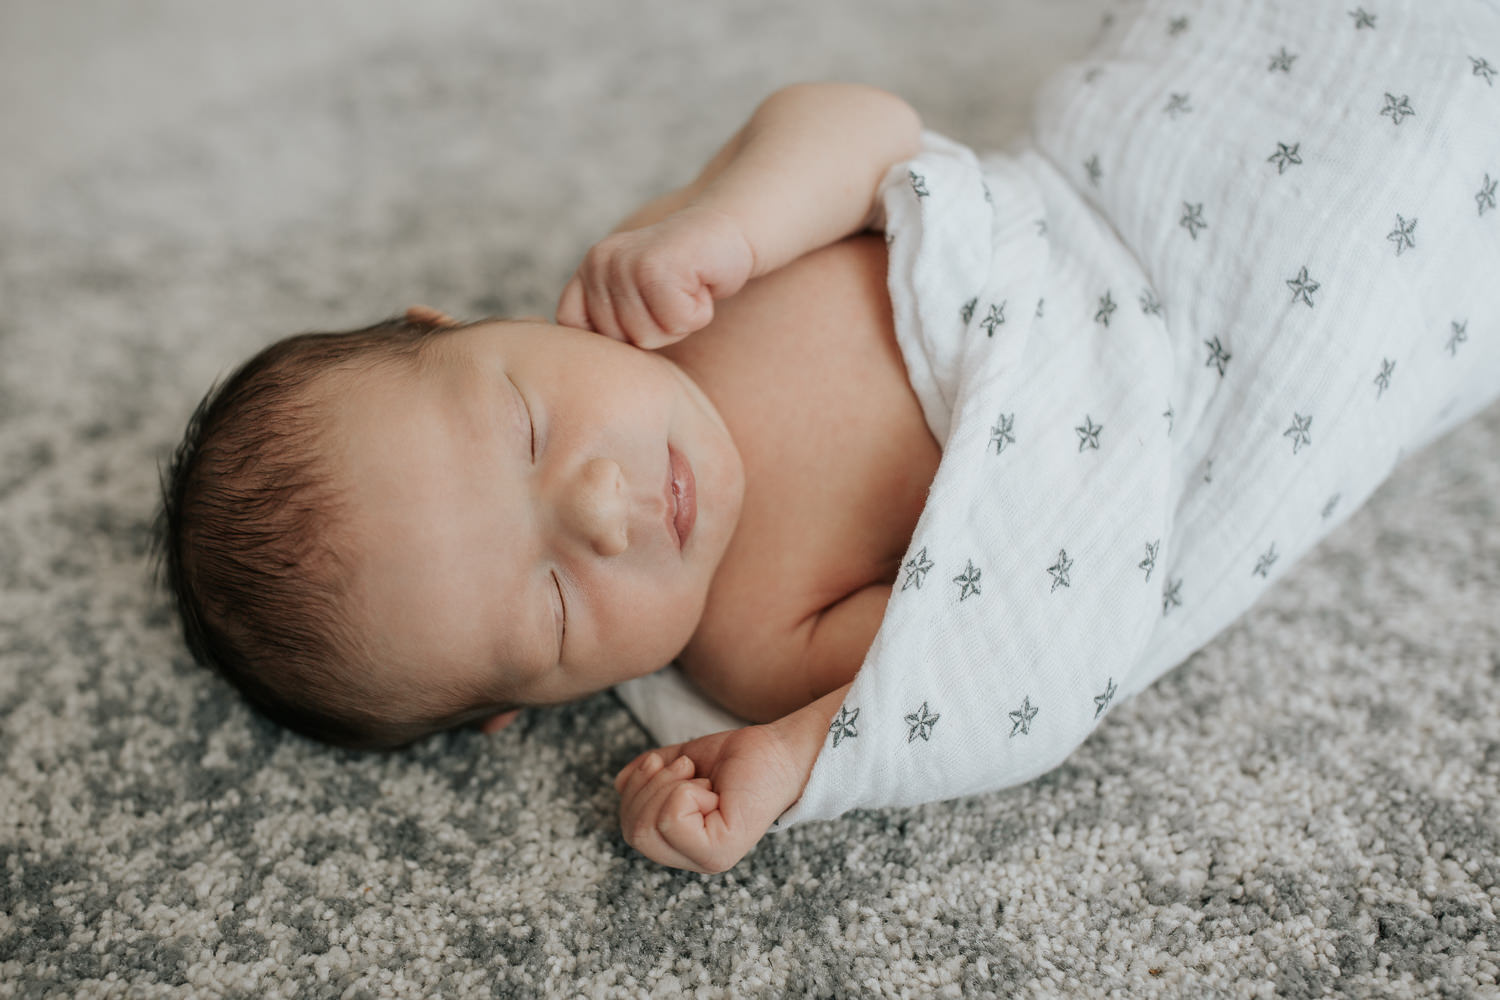 close up of 2 week old baby boy with dark hair and olive skin wrapped in swaddle with star on it, sleeping with hands near face - GTA Lifestyle Photos